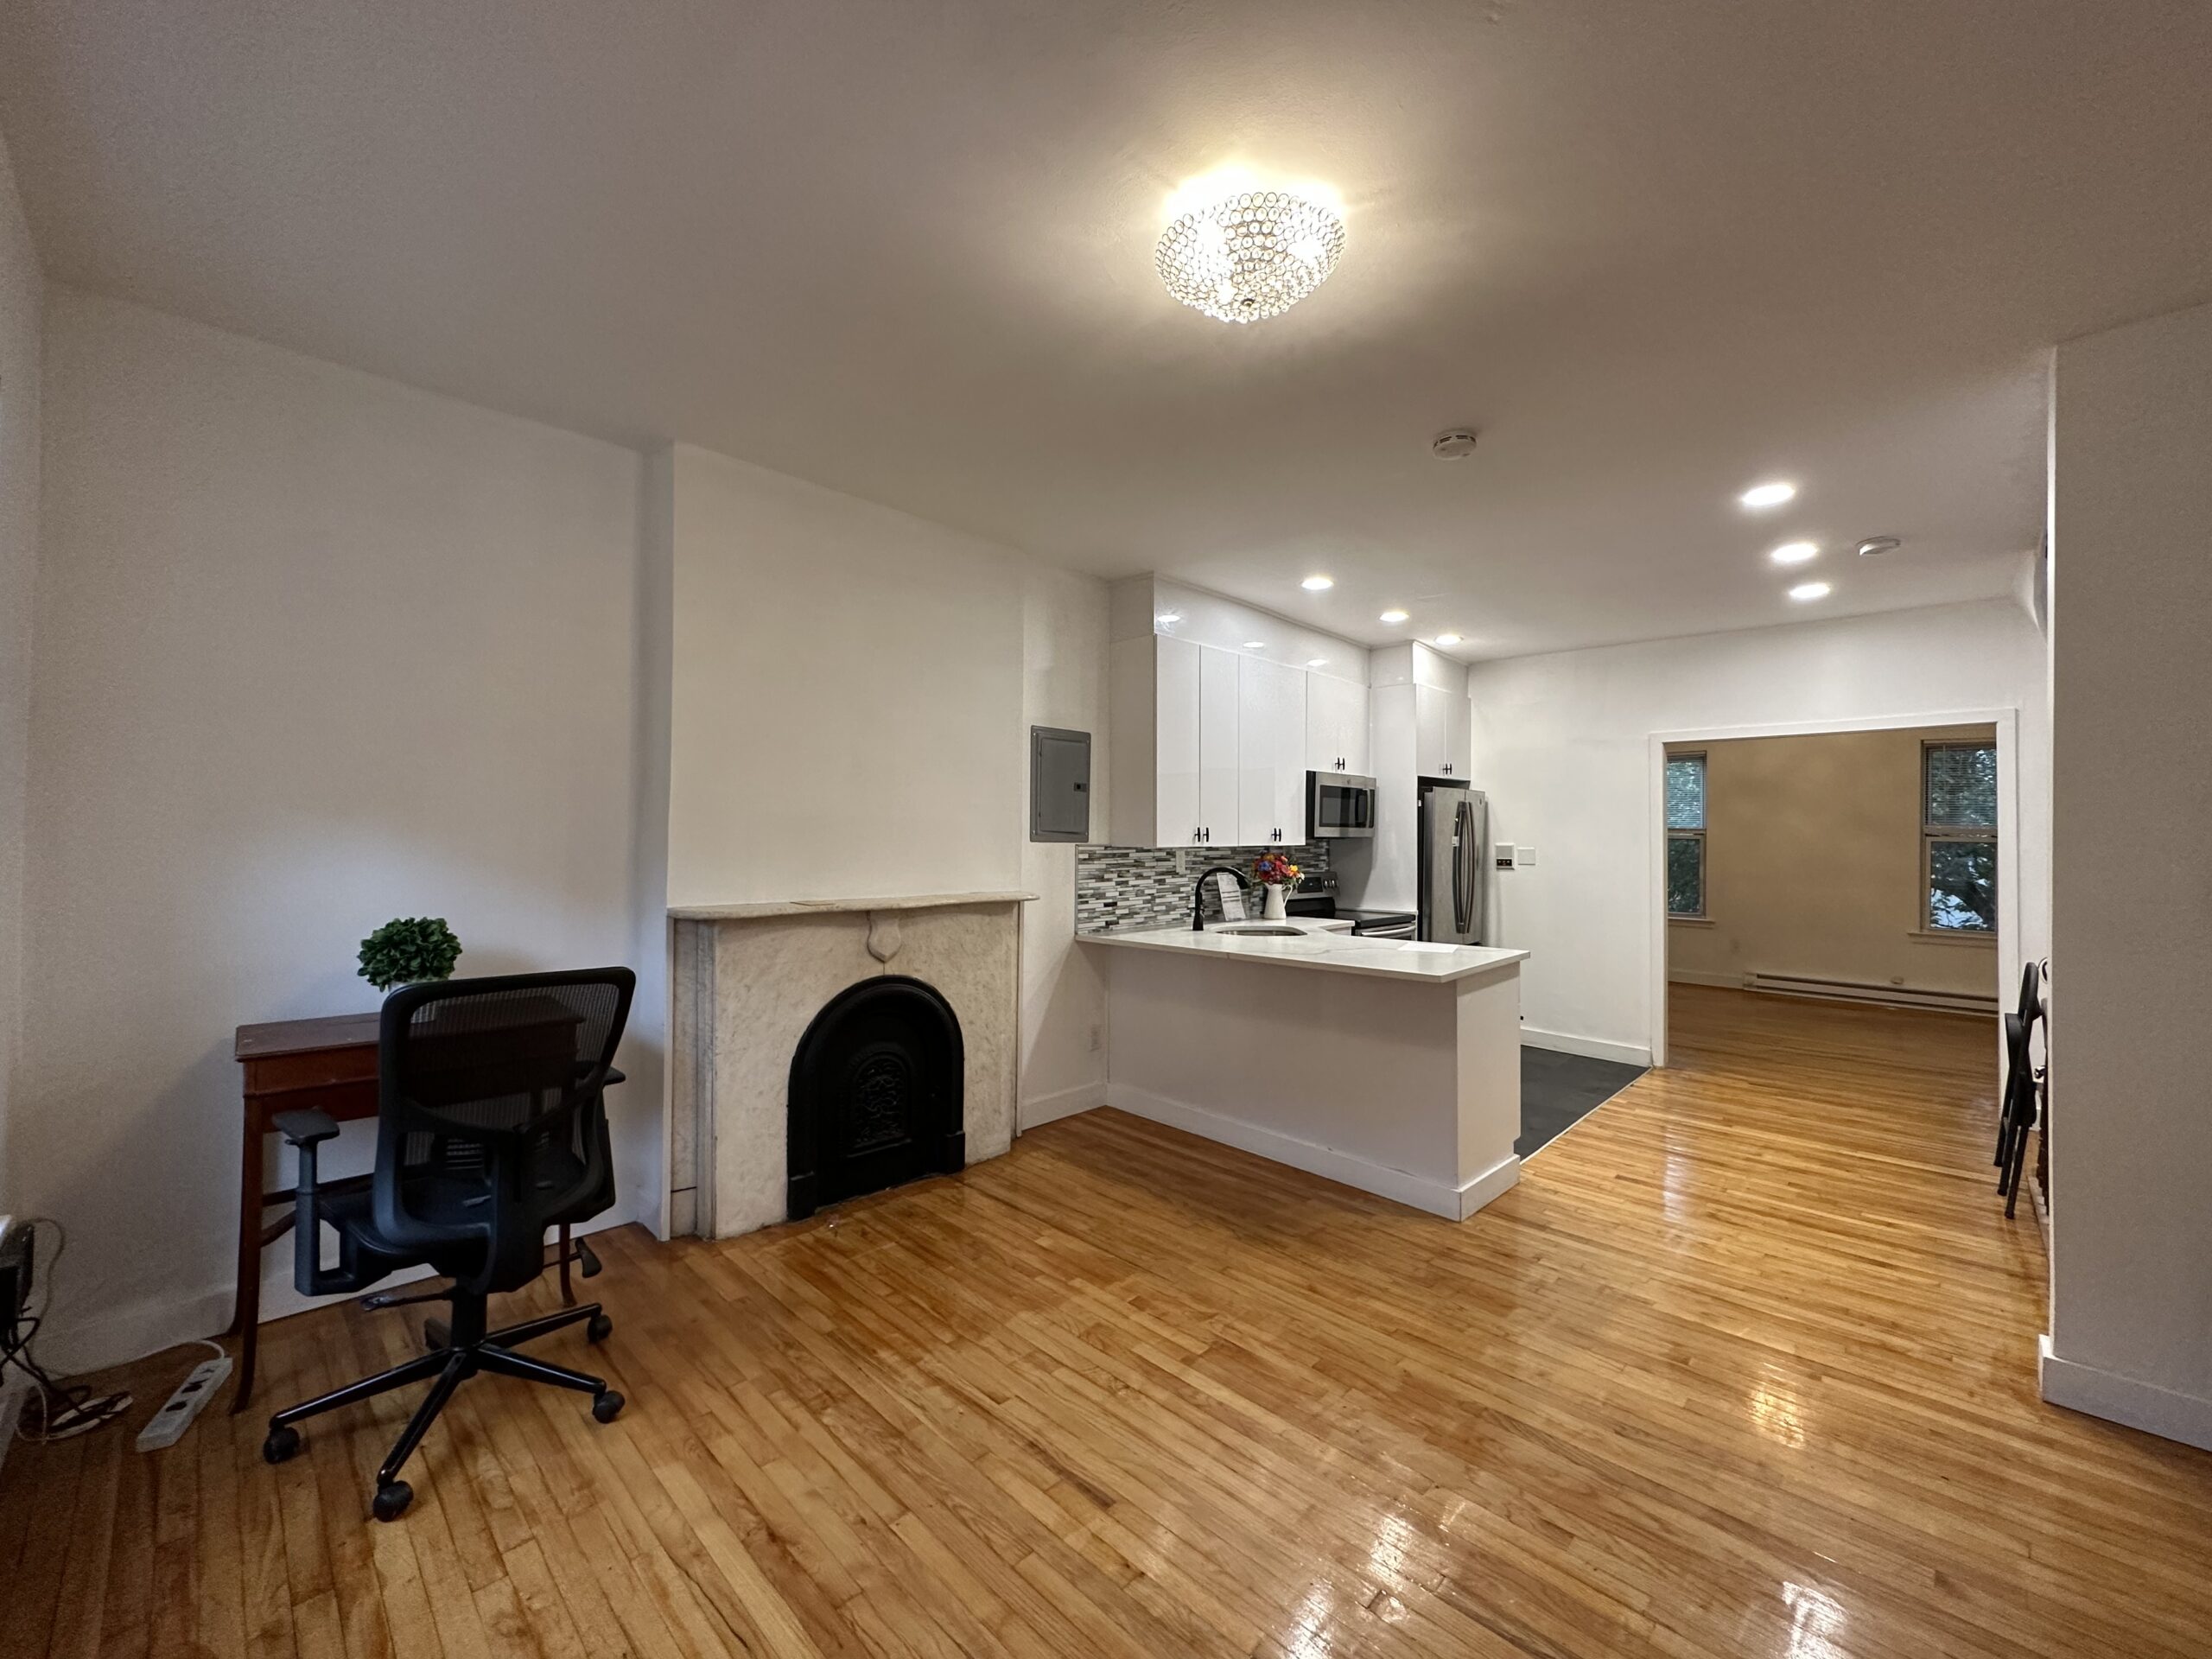 298 8th St. #2 (Rented)